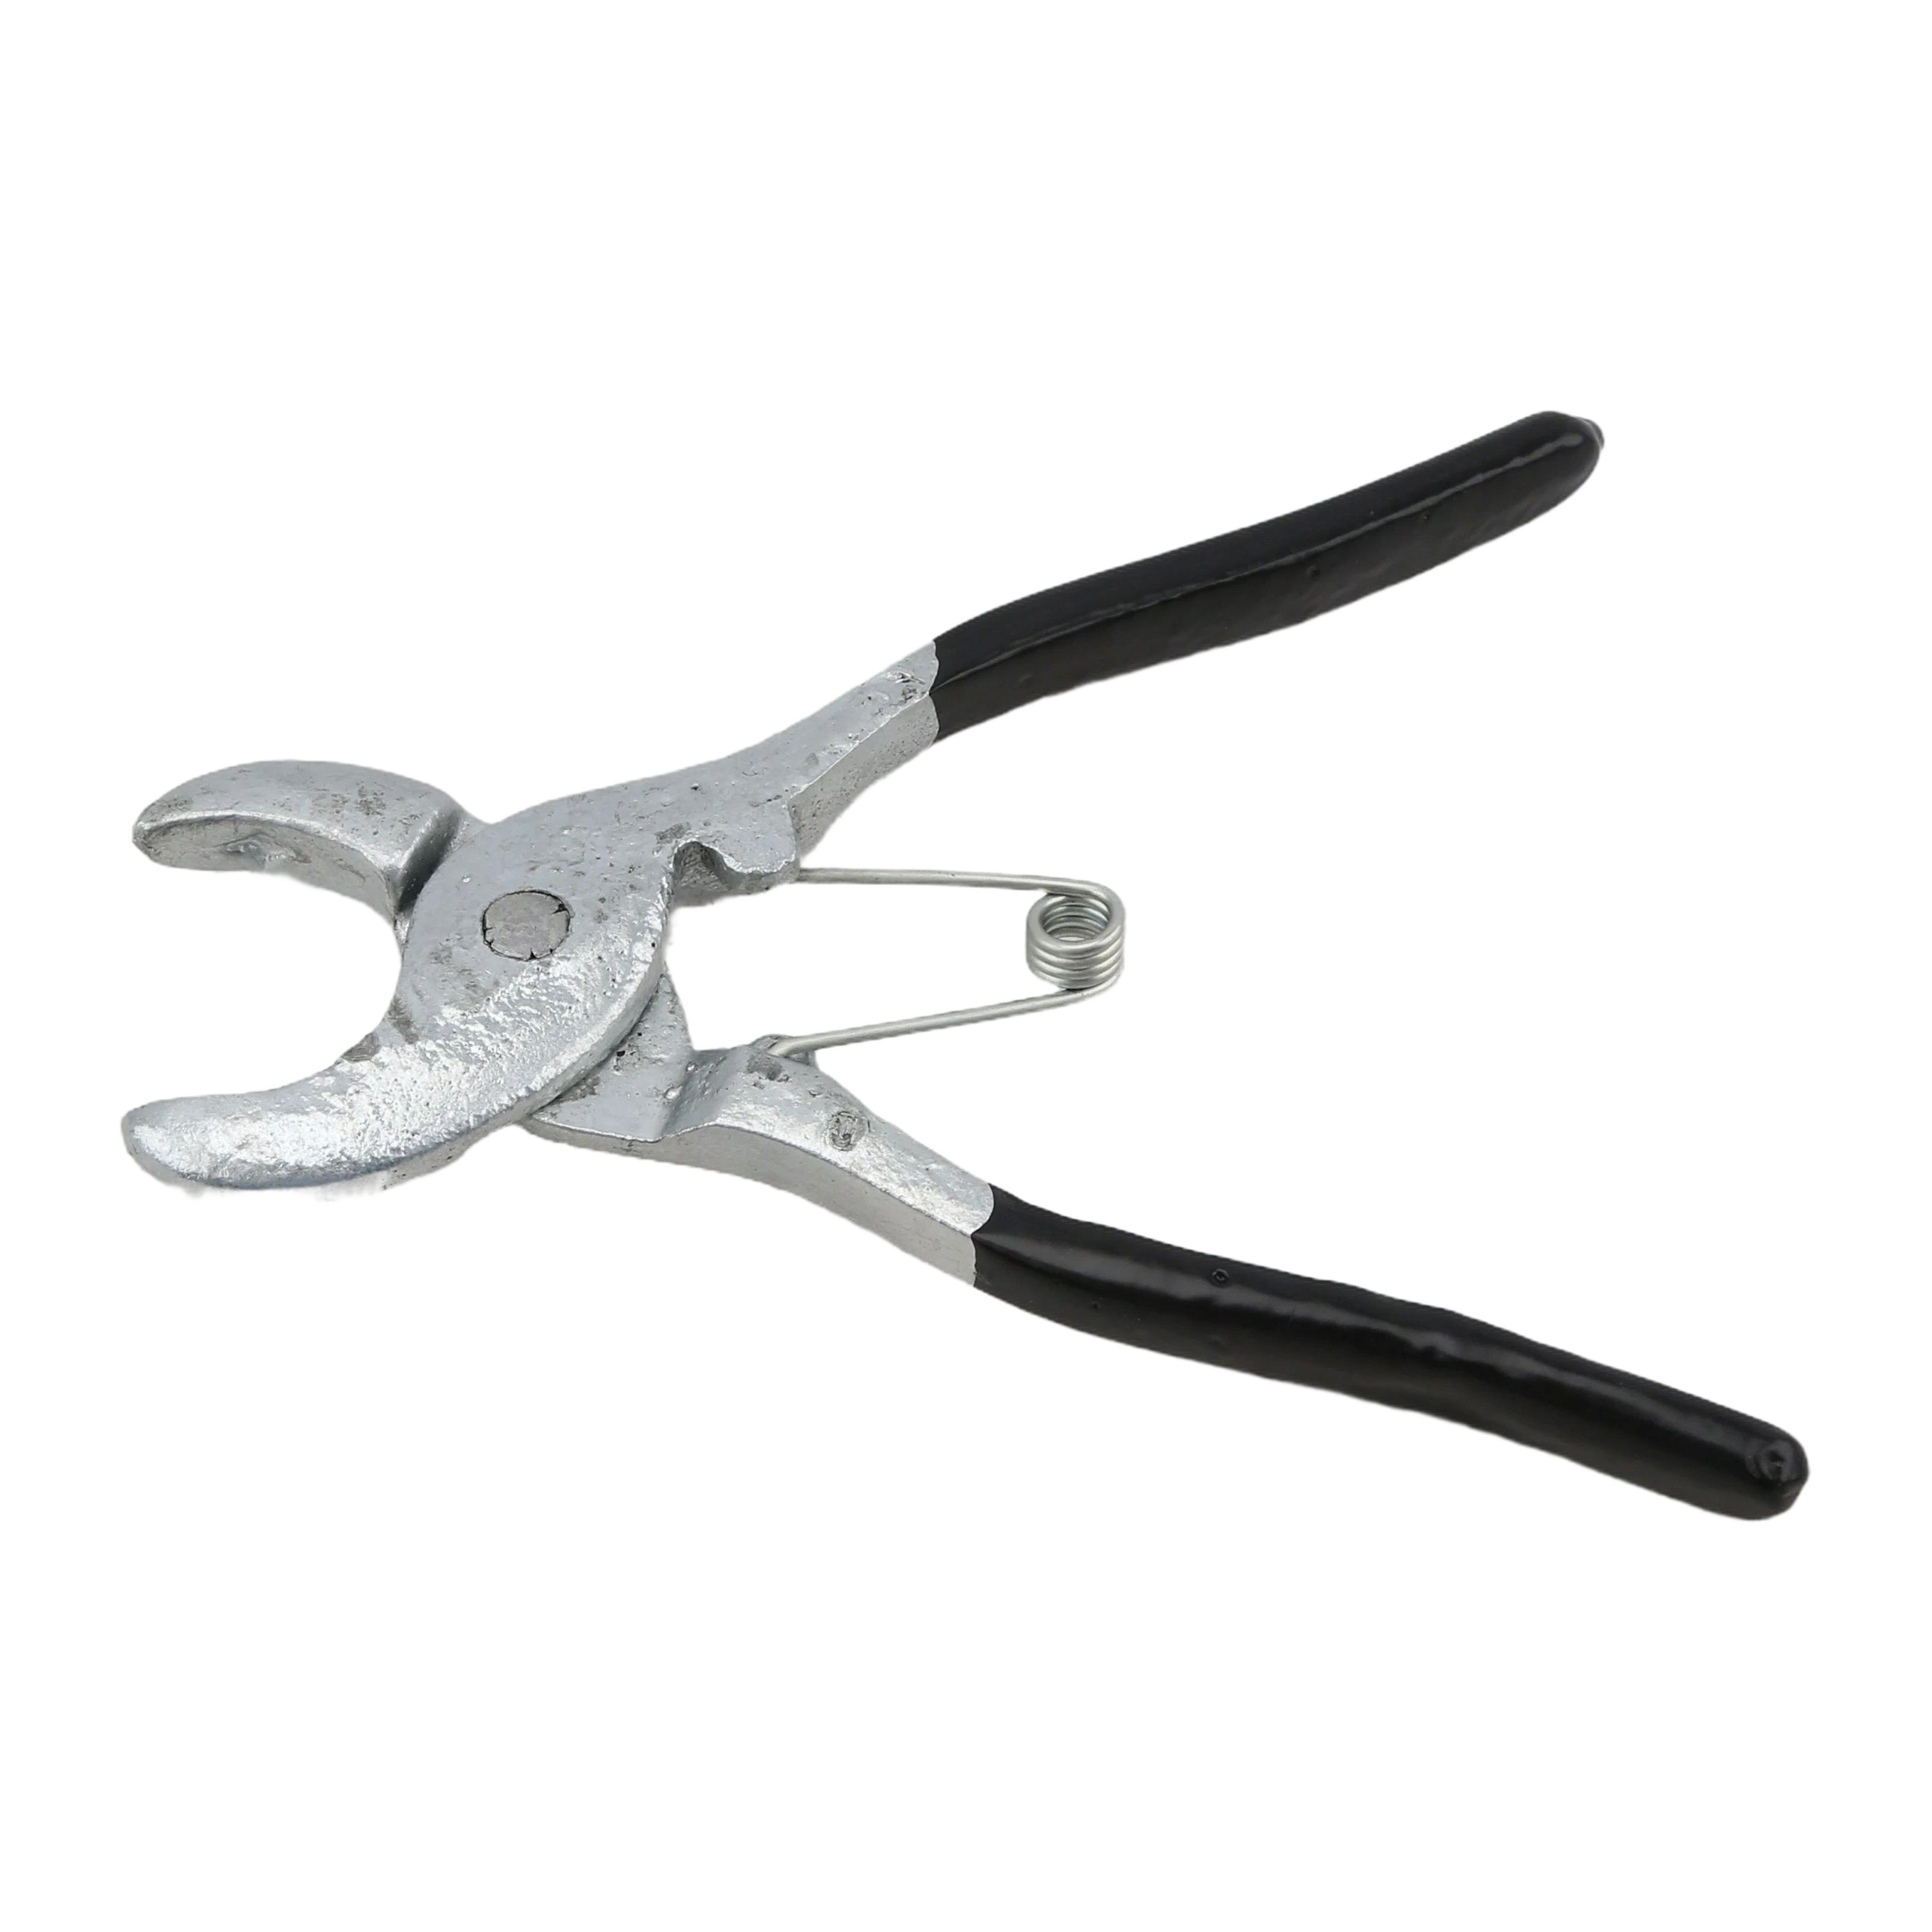 8 Spring Assist Hog Ring Pliers - Fence Tool (Malleable Iron